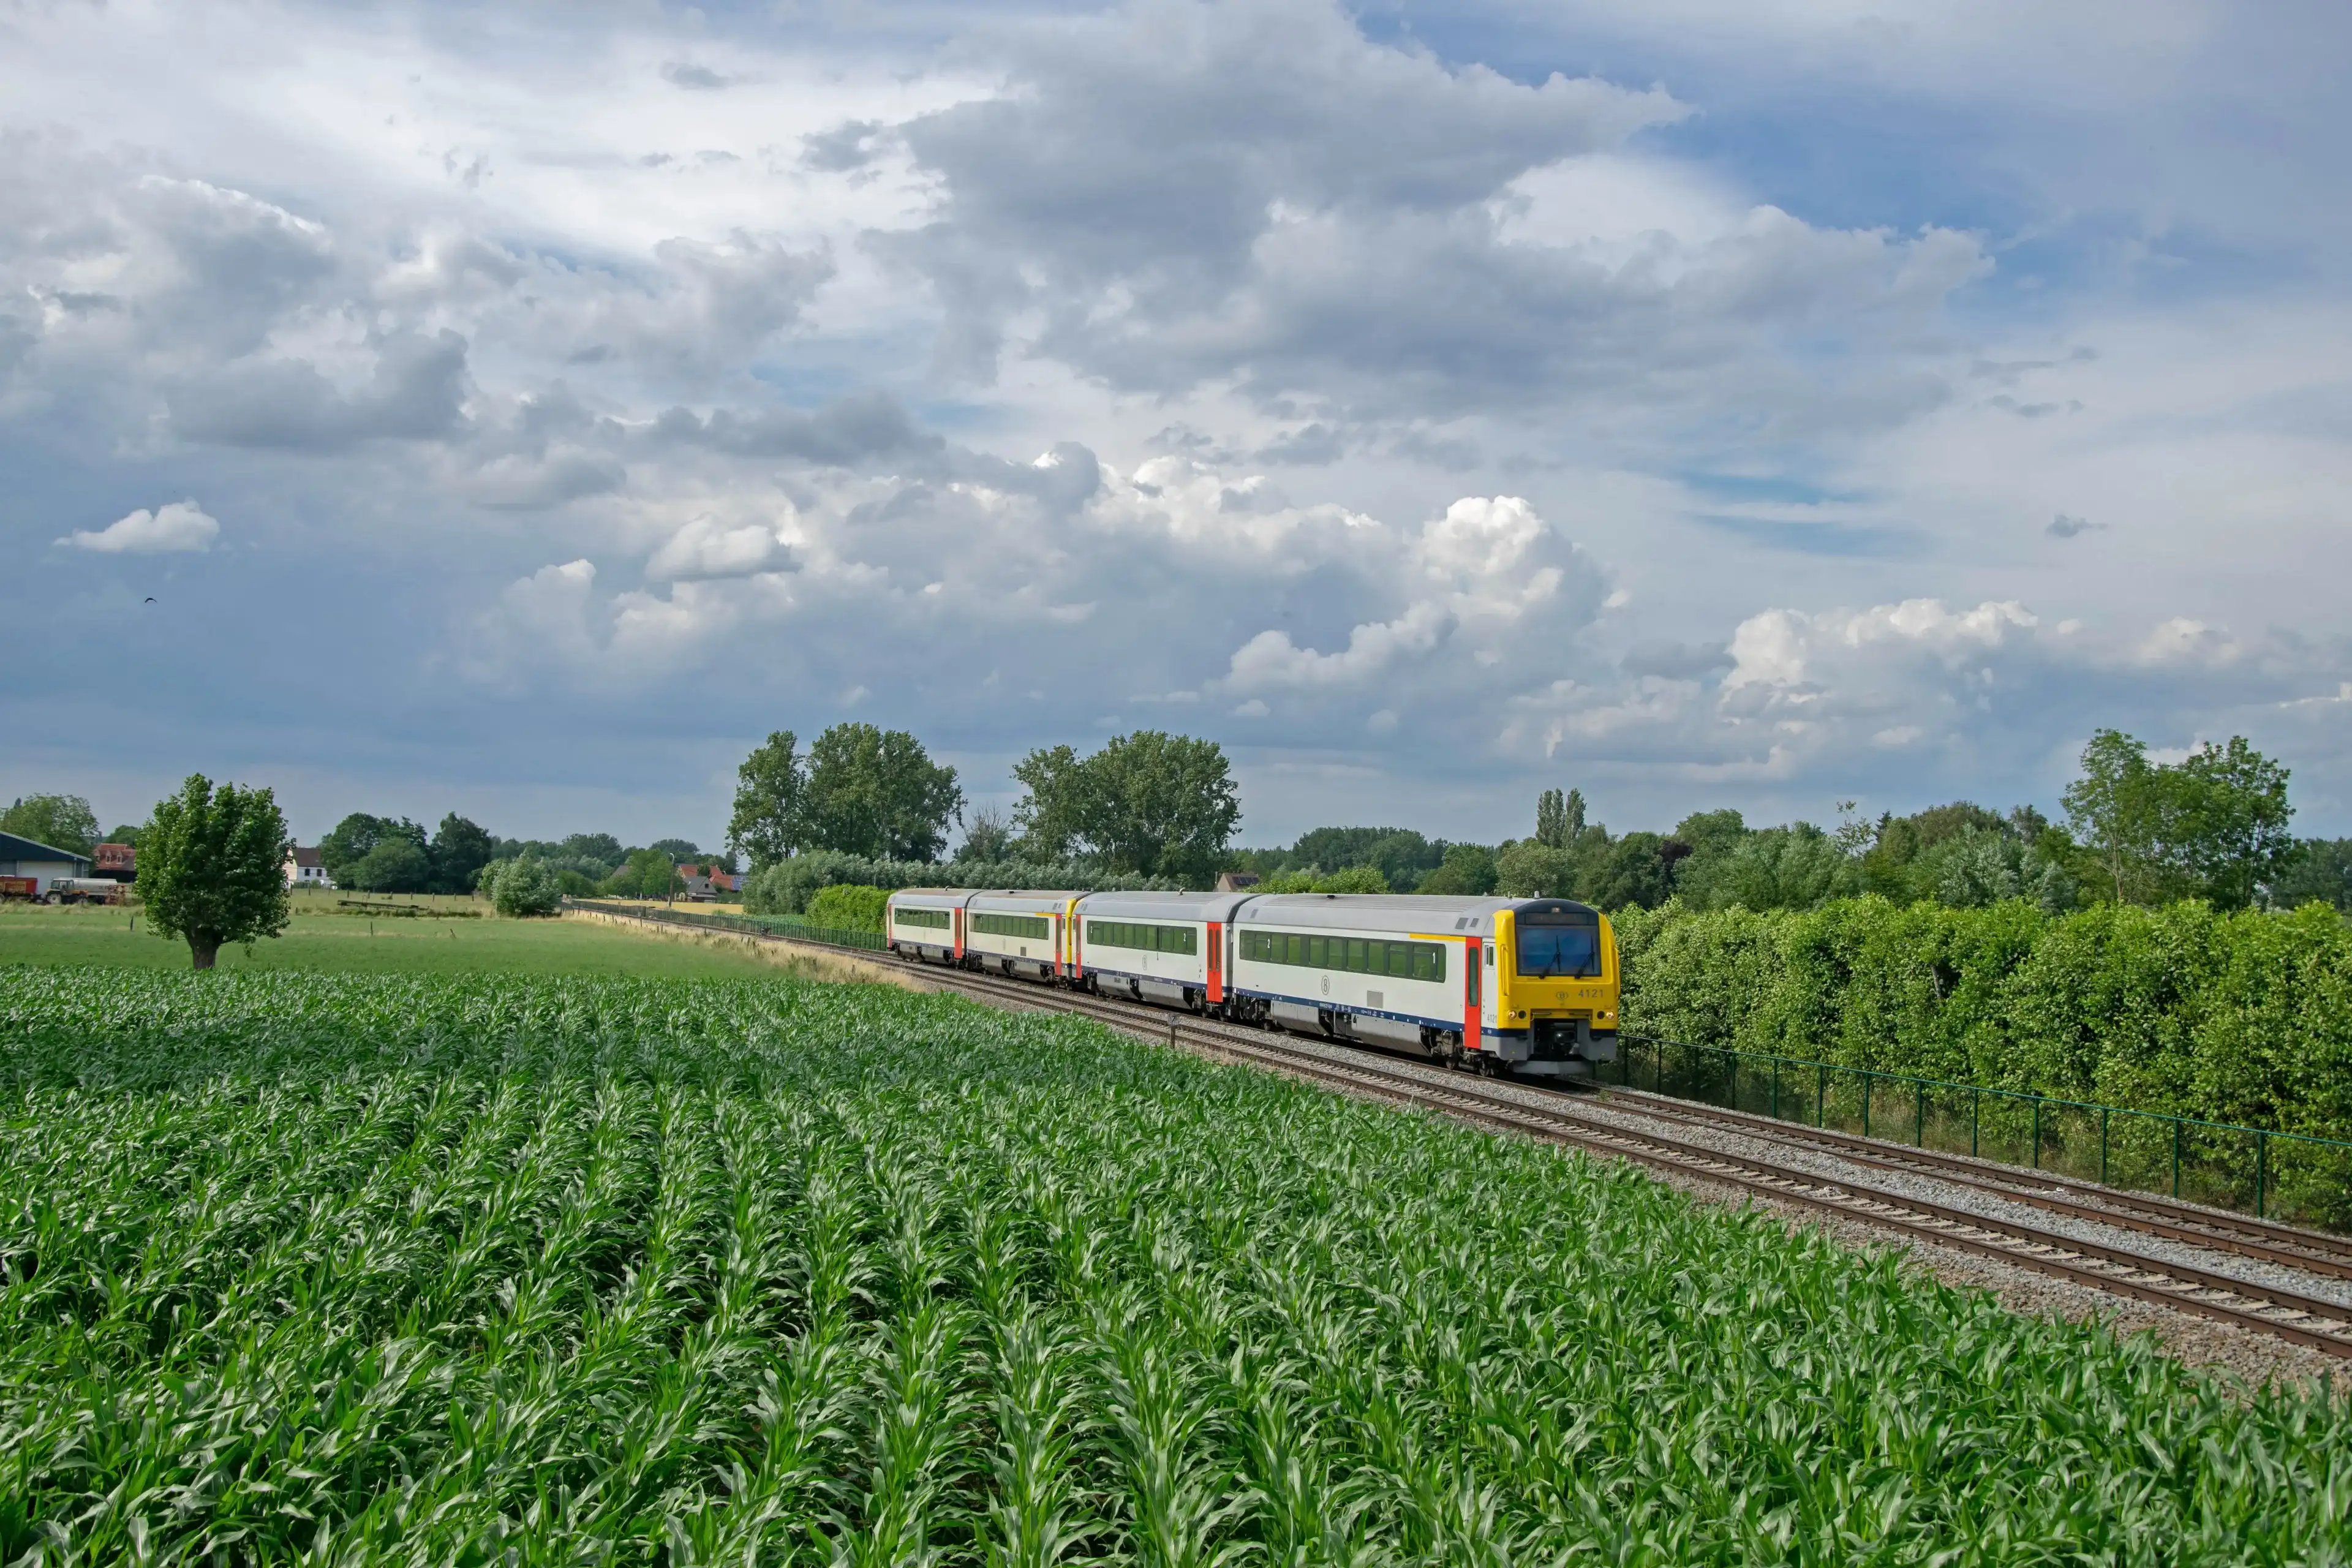 BALEGEM, Belgium - July 09, 2021: NMBS-SNCB MW-AR 41 (no. 4121) Diesel DMU Railway Passenger Train Set under Grey Cloudy Sky in Sunny Weather in Rural Natural Environment with Corn Field and Trees